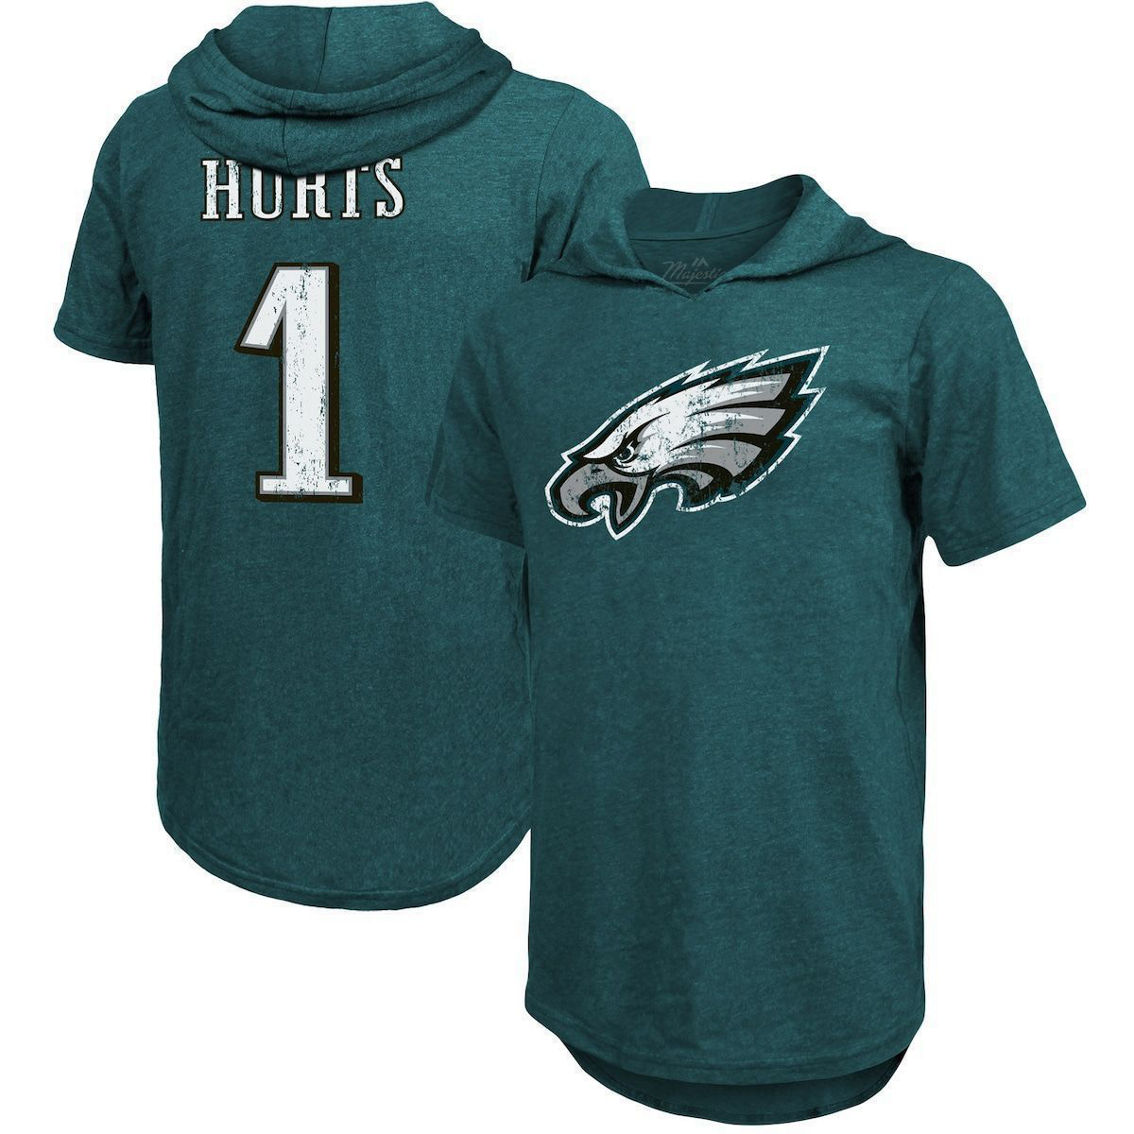 Majestic Threads Men's Threads Jalen Hurts Midnight Green Philadelphia Eagles Player Name & Number Tri-Blend Slim Fit Hoodie T-Shirt - Image 2 of 4